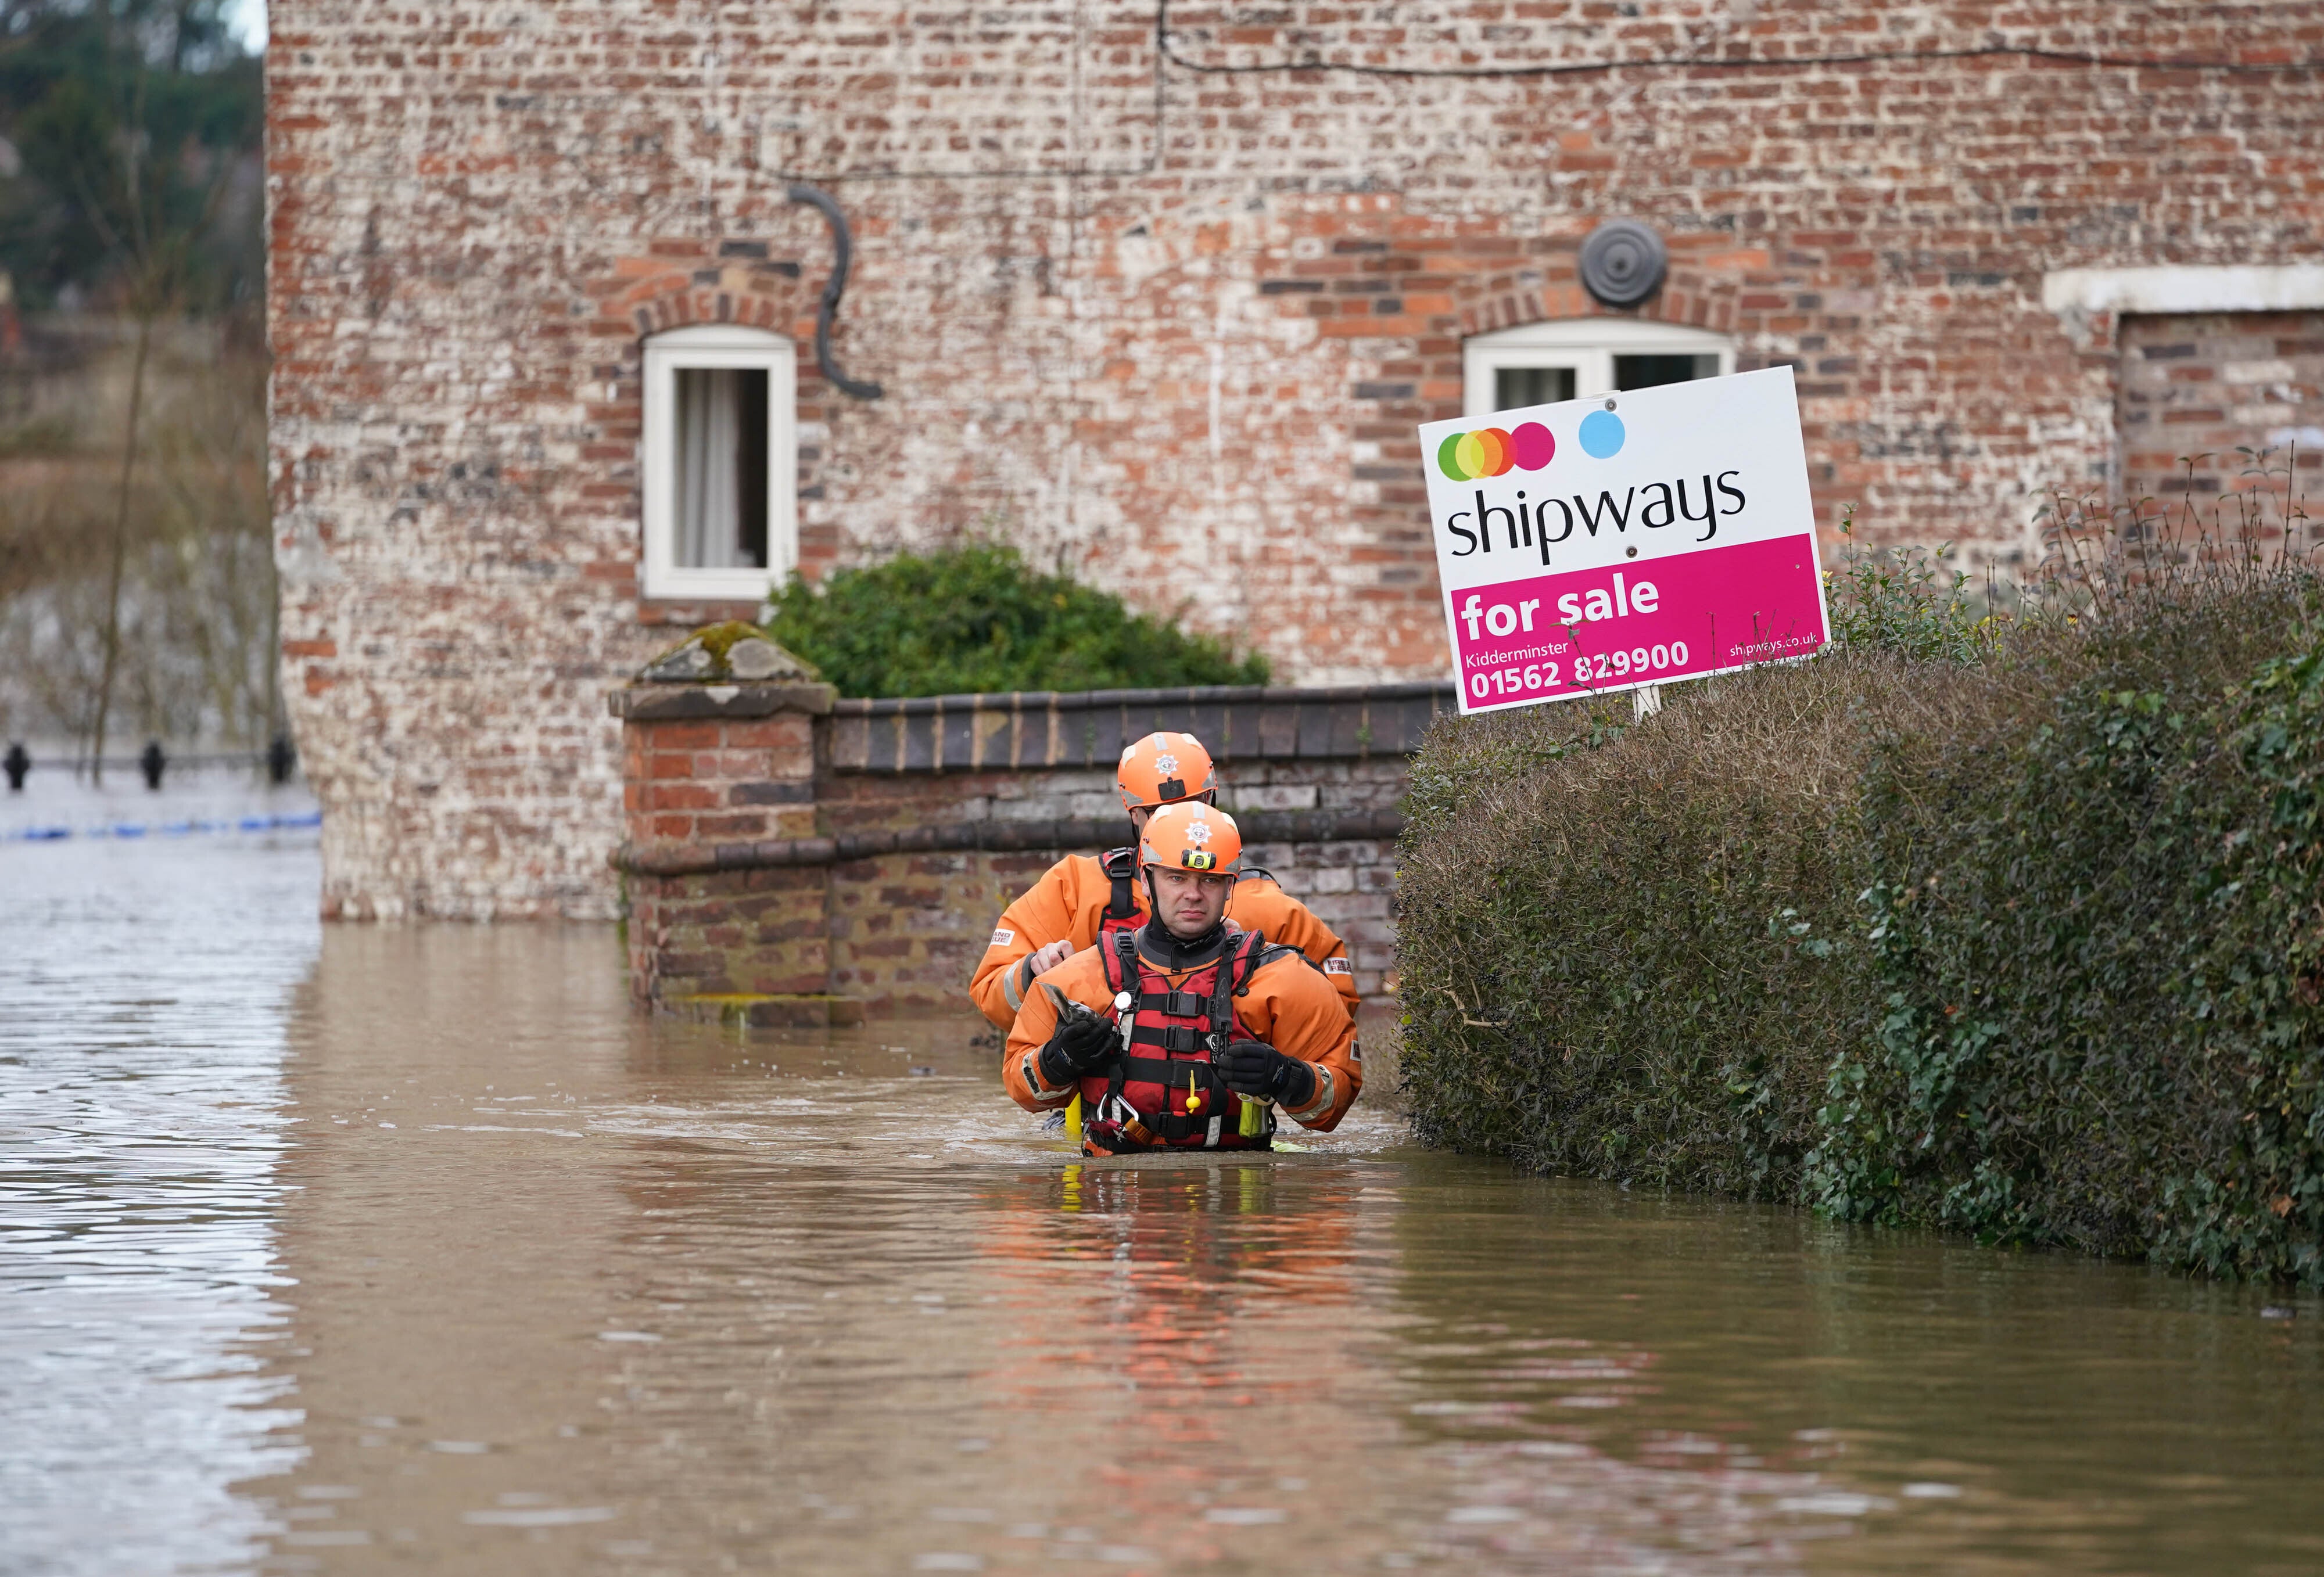 A fire and rescue team in floodwater in Bewdley (Joe Giddens/PA)